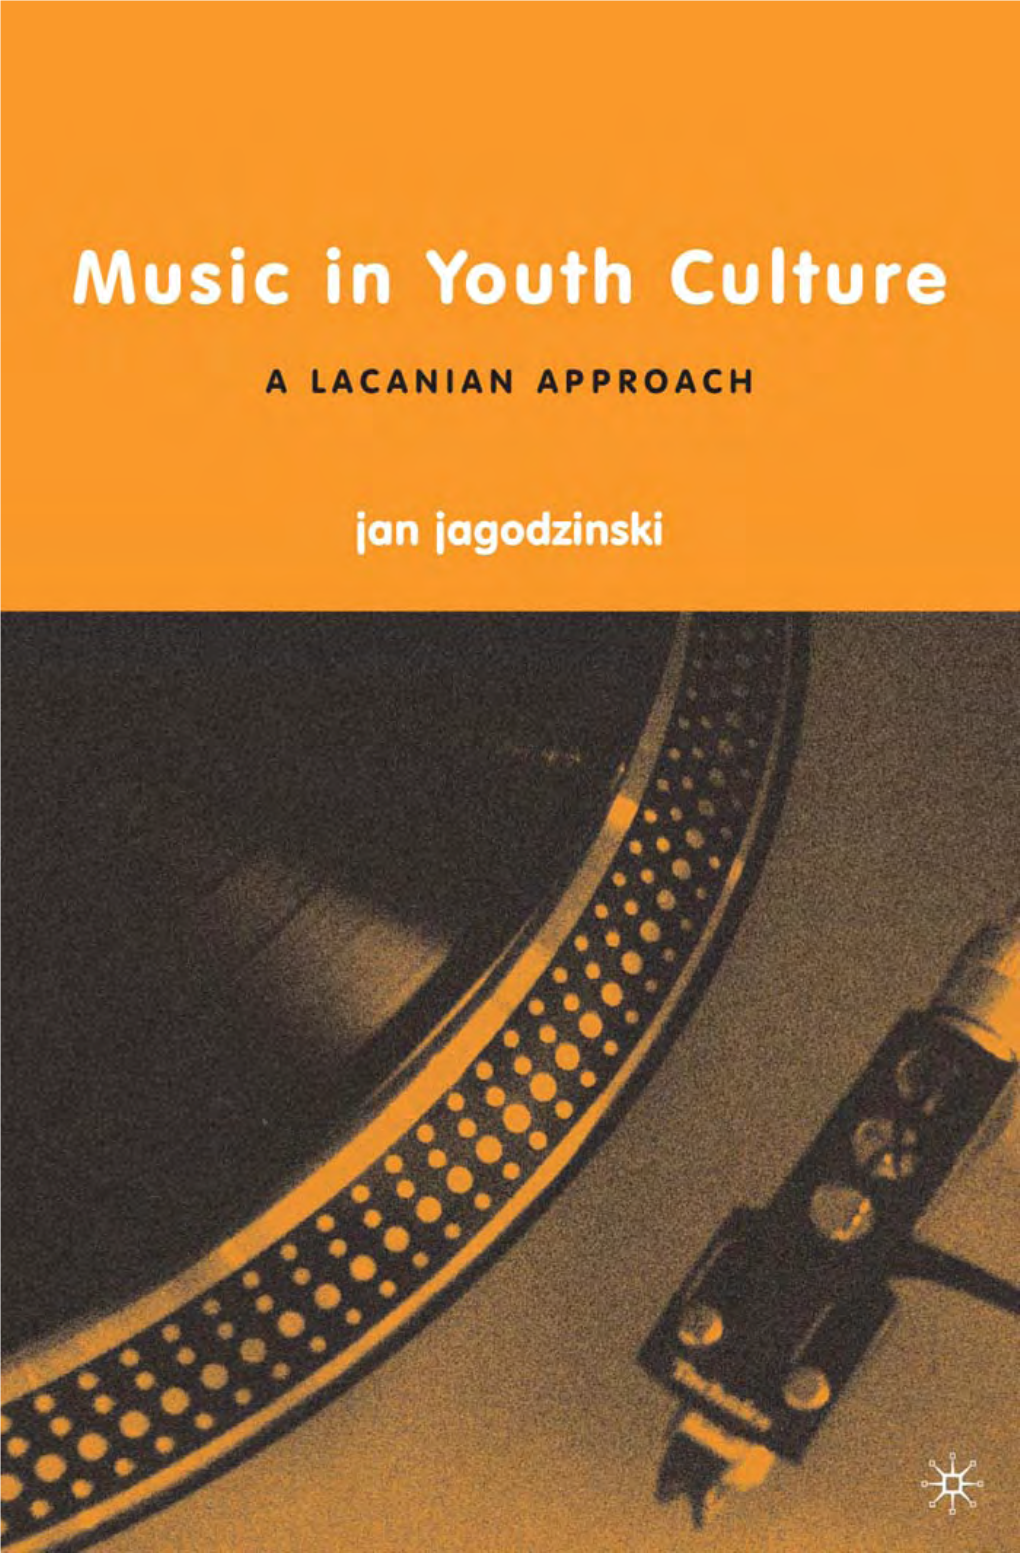 Music in Youth Culture: a Lacanian Approach